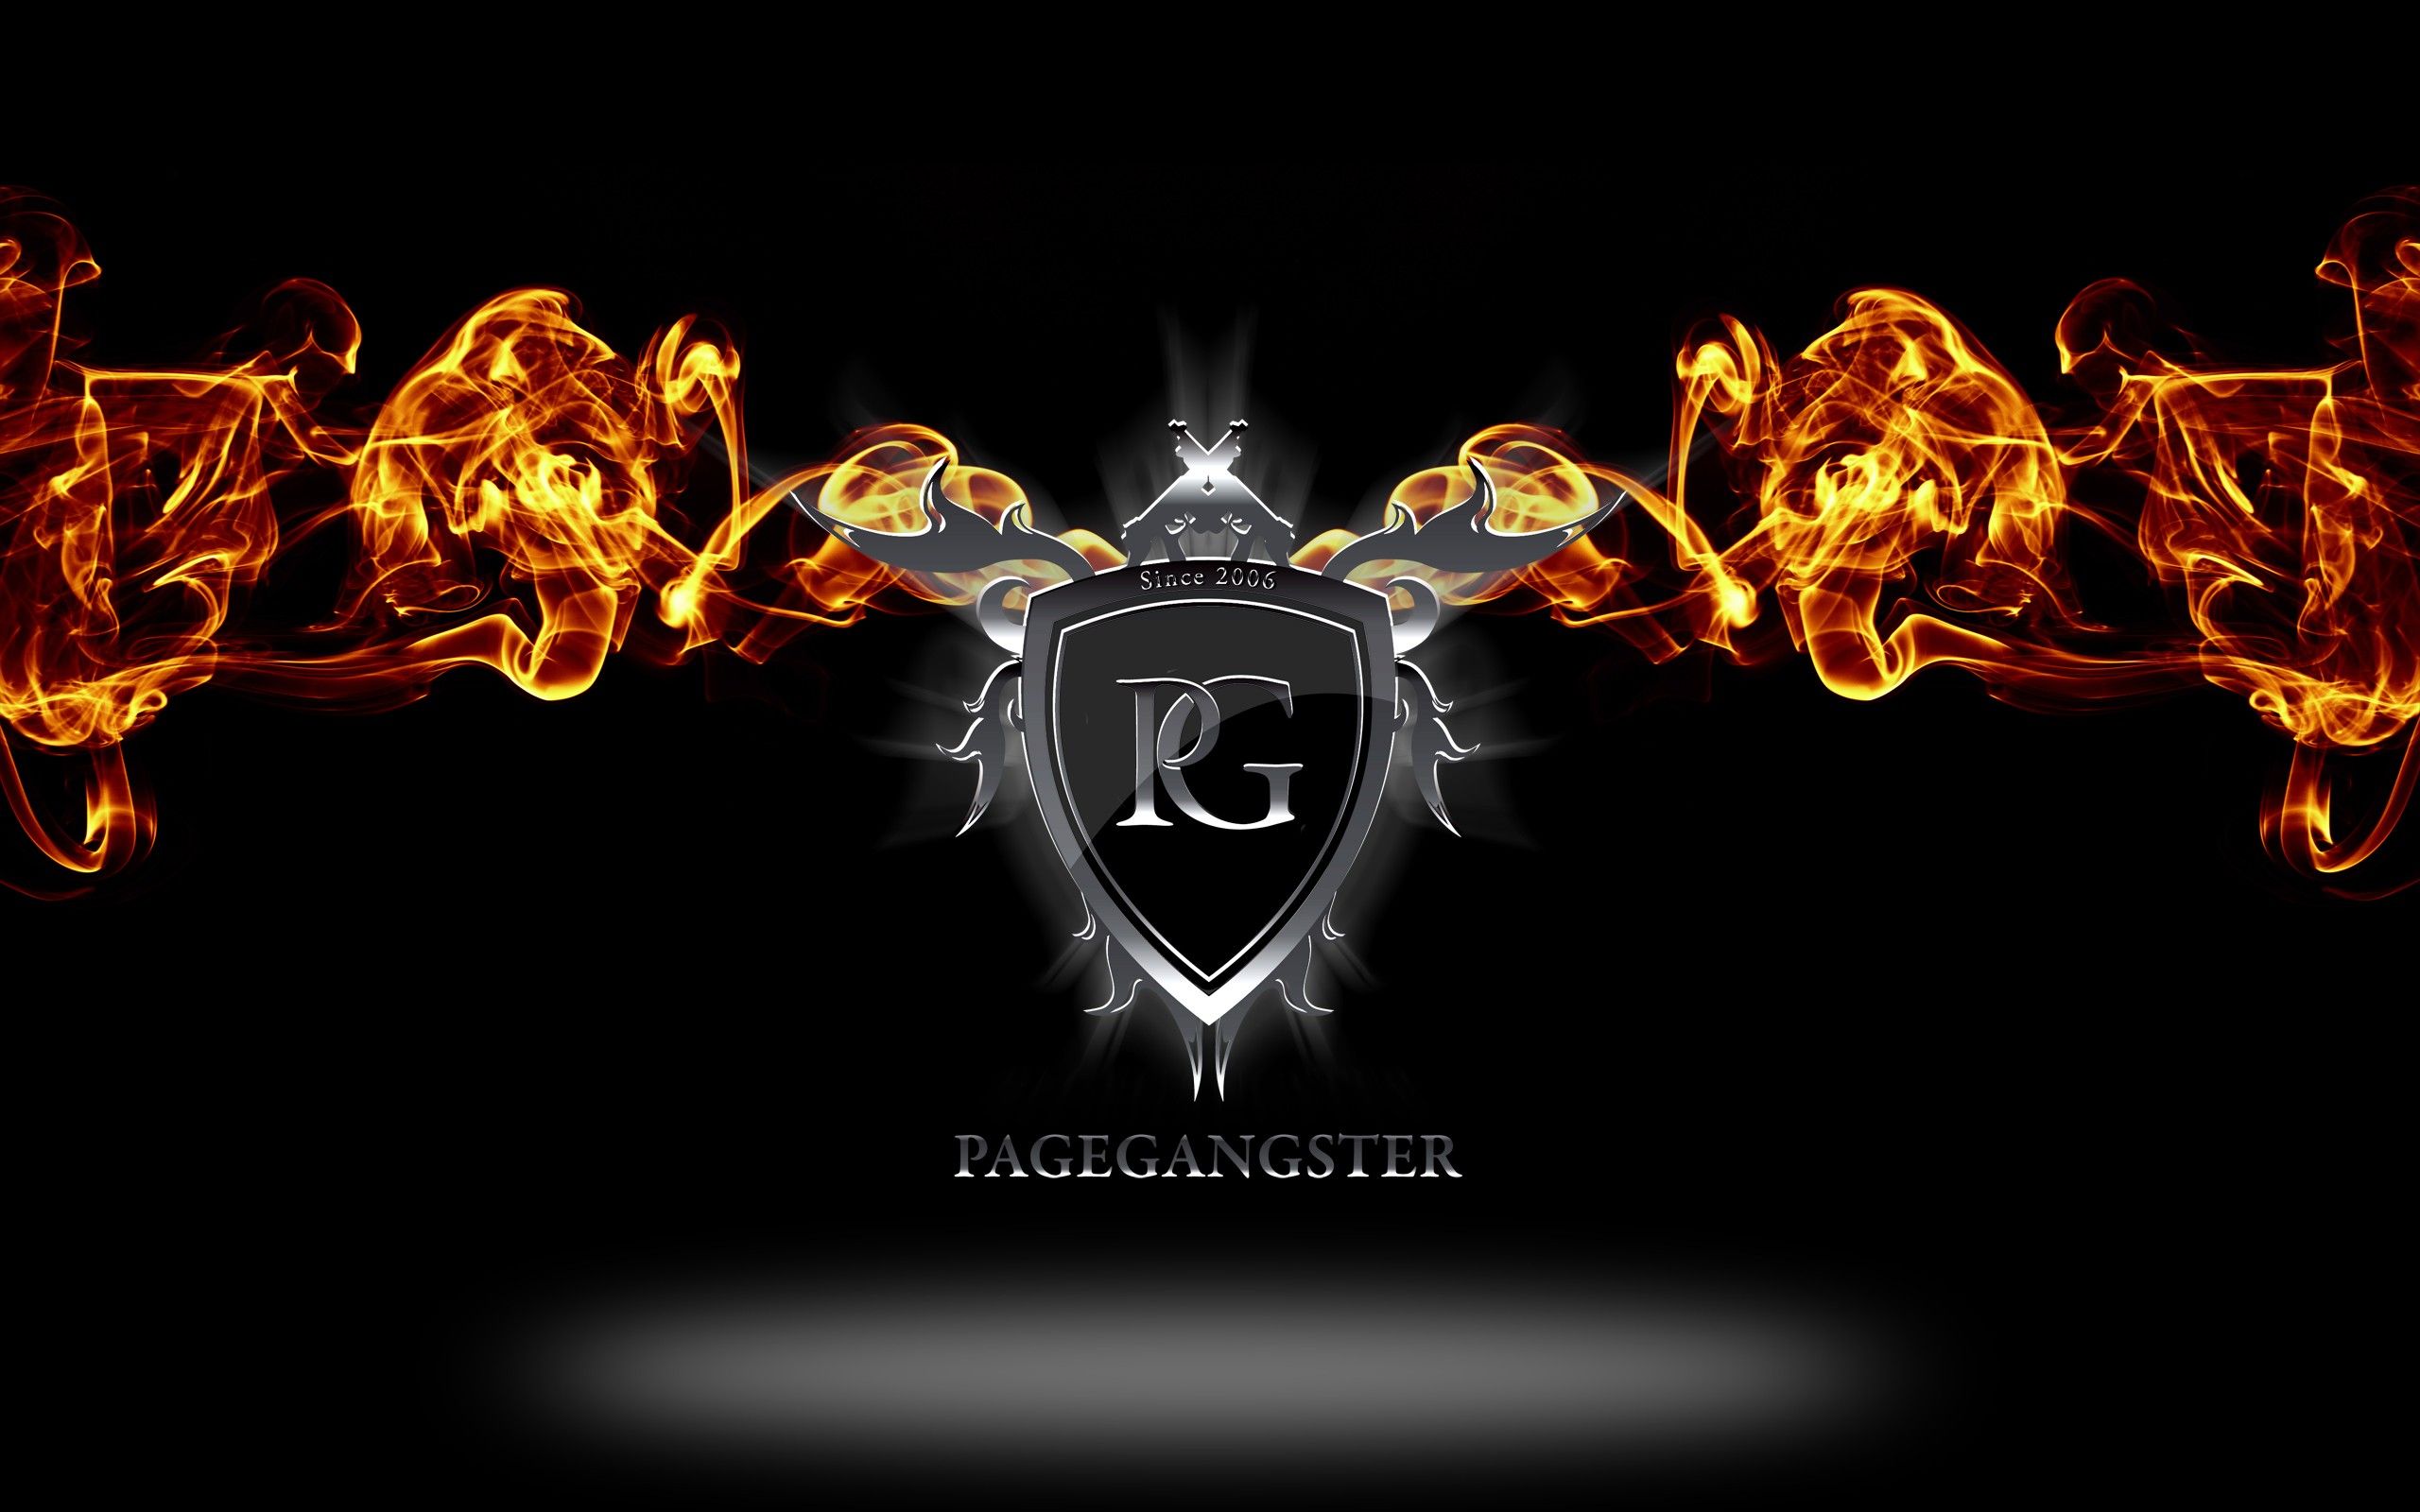 Gangster Wallpapers on Windows PC Download Free - 1.0 - com.Gangster. Wallpaper